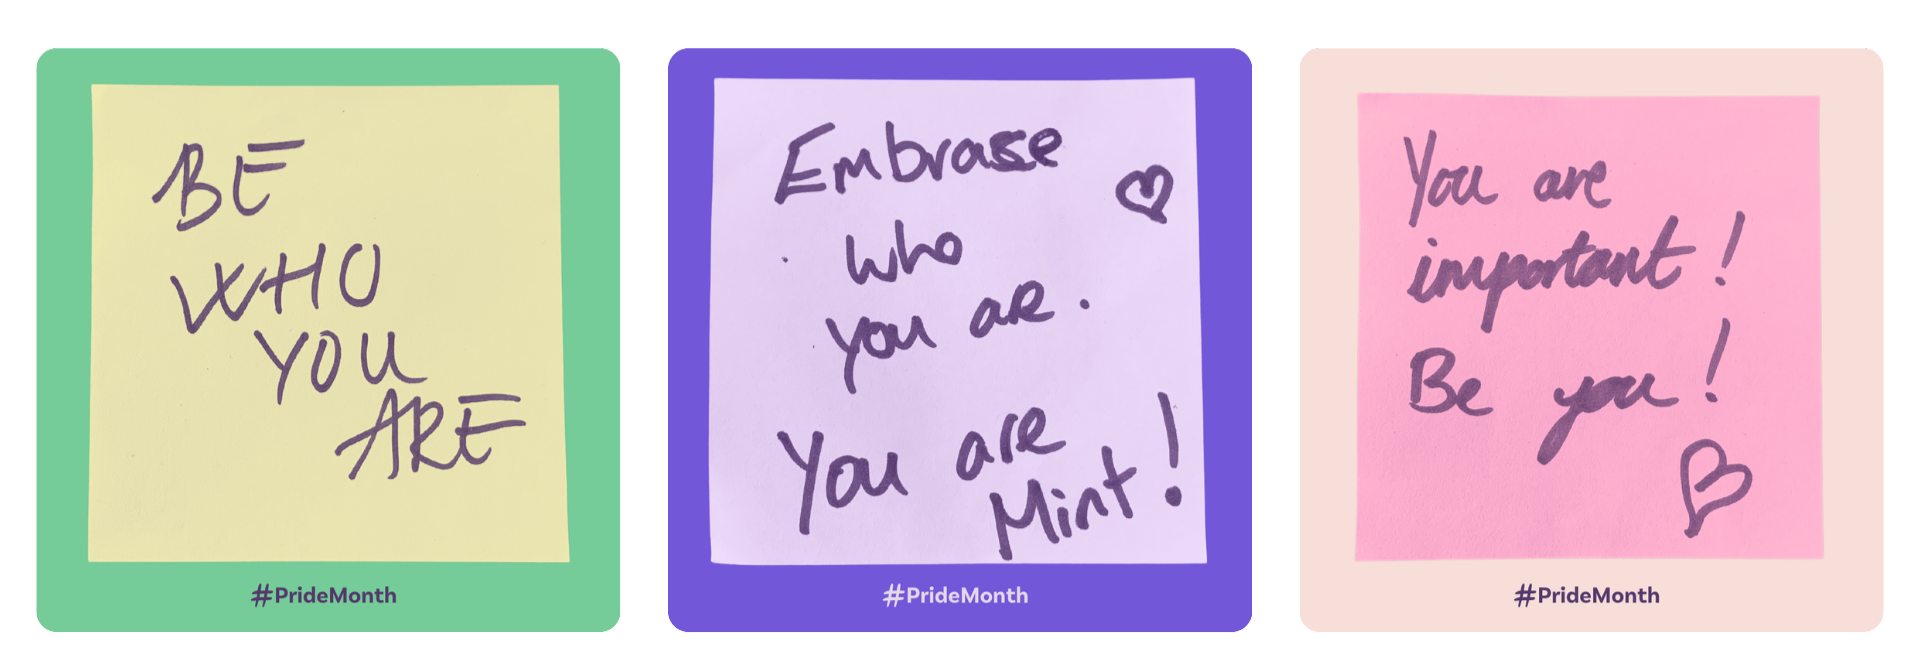 Three images of post-it notes with writing on them. Note 1 reads: "Be who you are" Note 2 reads: "Embrace who you are. You are mint!" Note 3 reads: "You are important! Be you!"